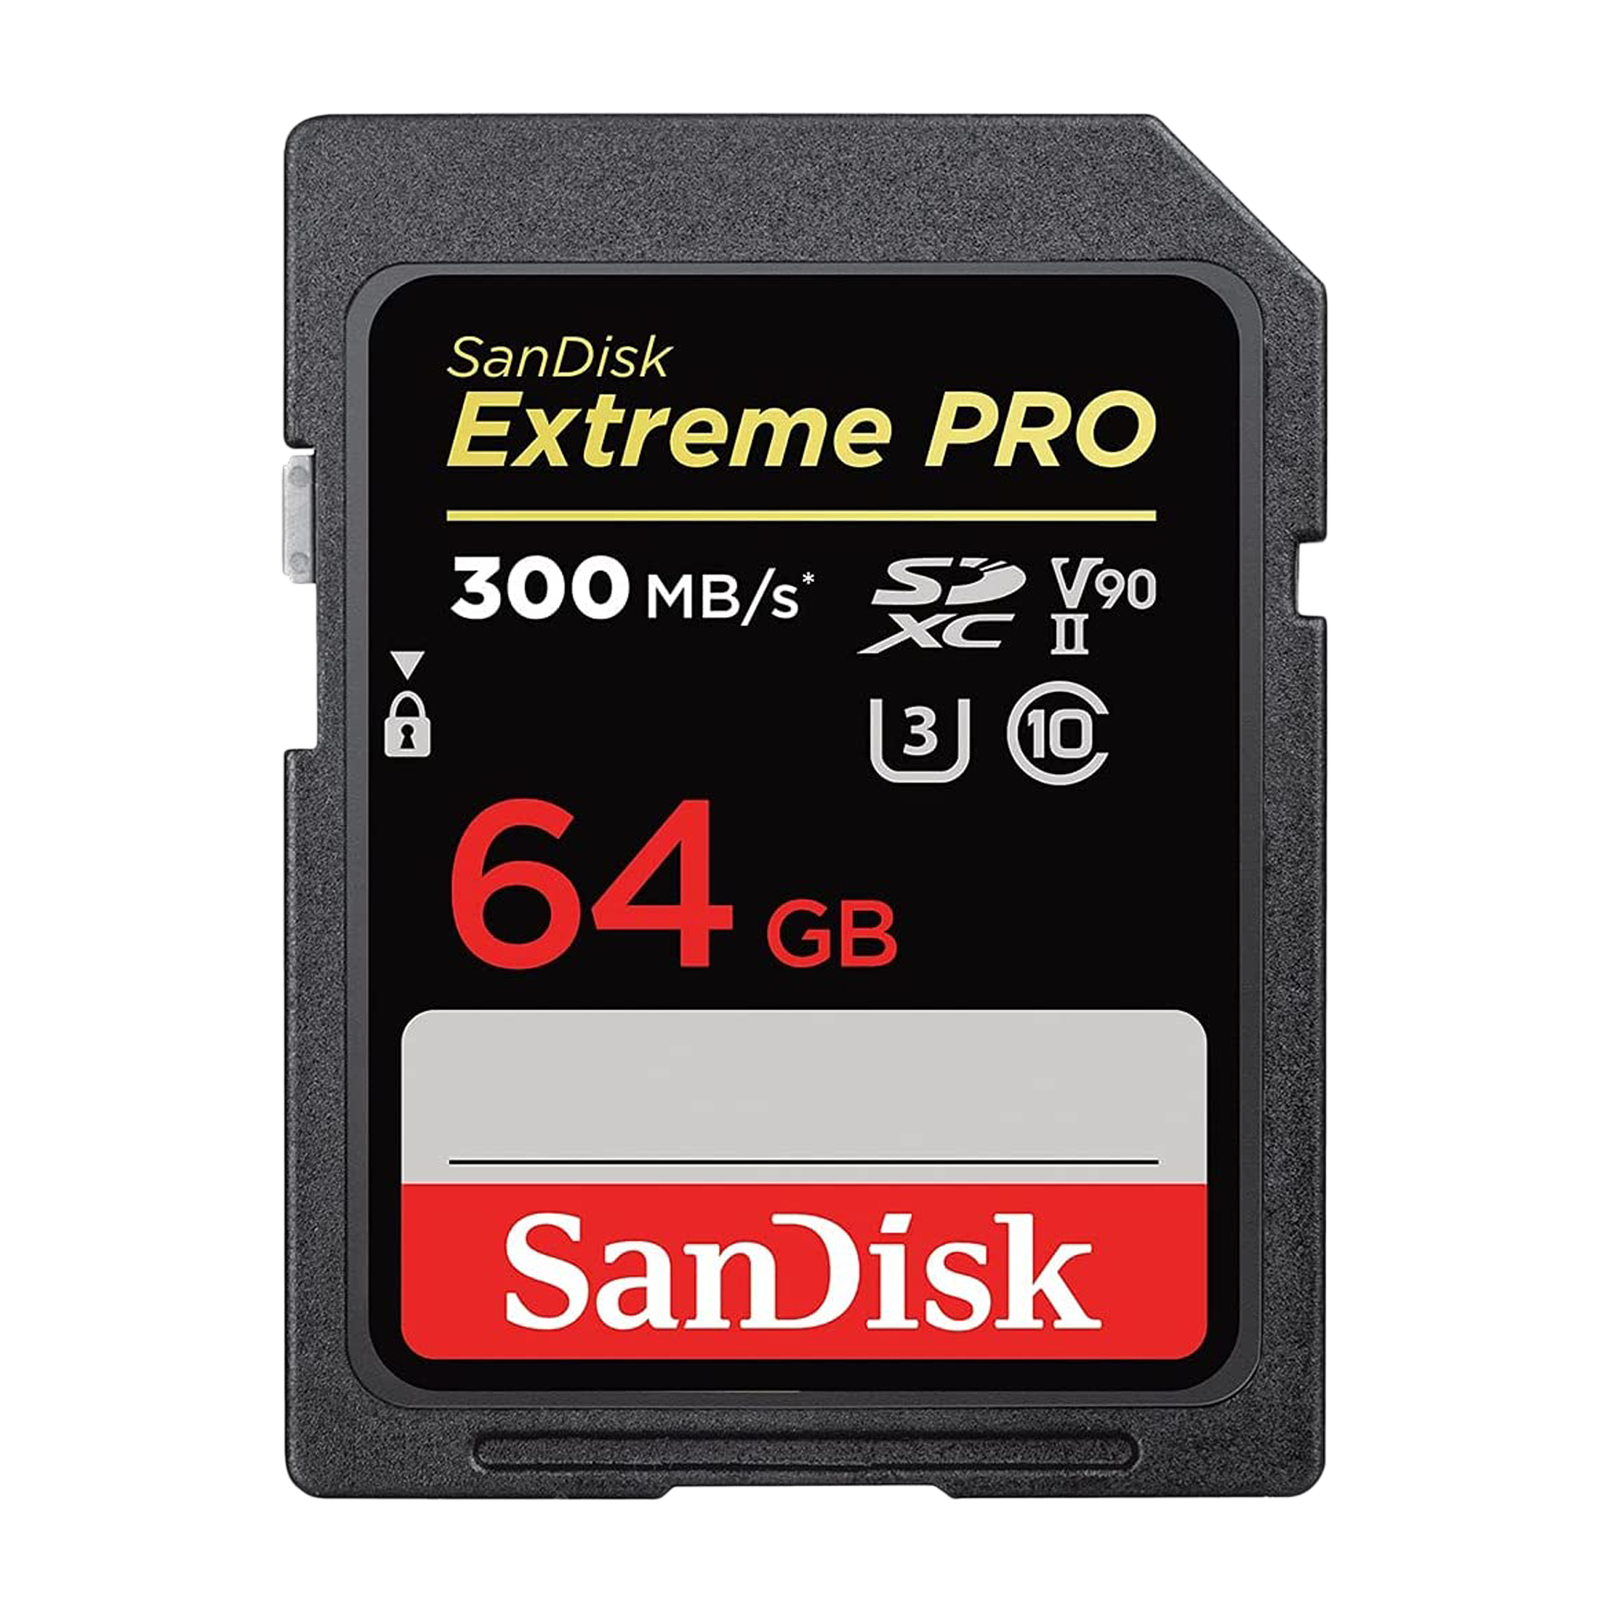 SanDisk Extreme Pro SDXC 64GB Class 10 300MB/s Memory Card